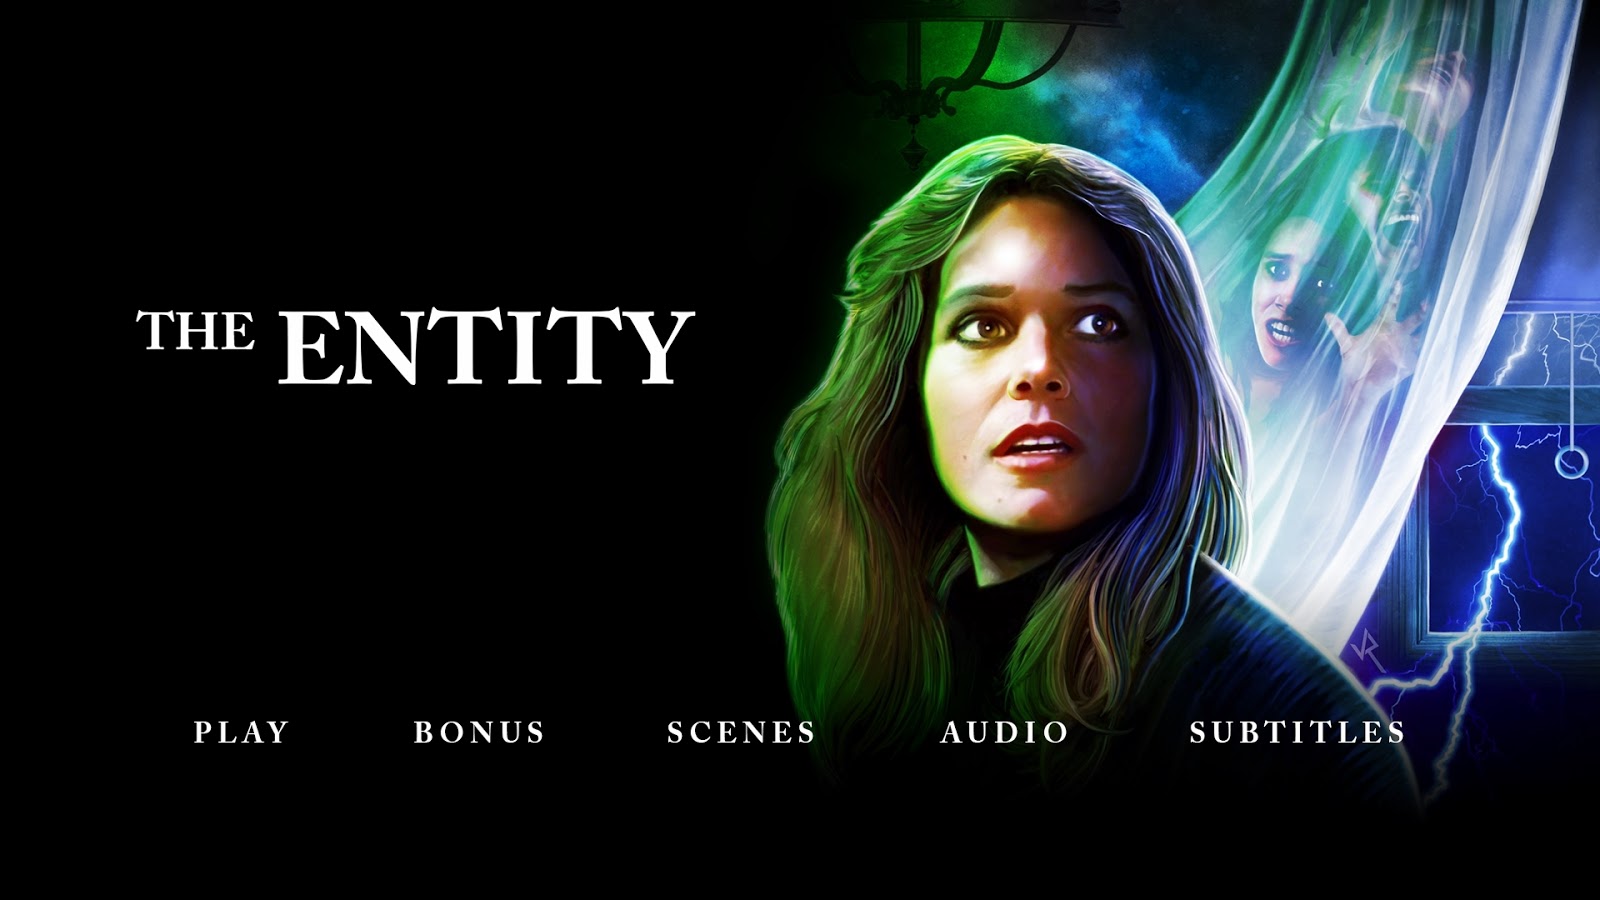 ahmed mejahed share the entity full movie 1982 photos